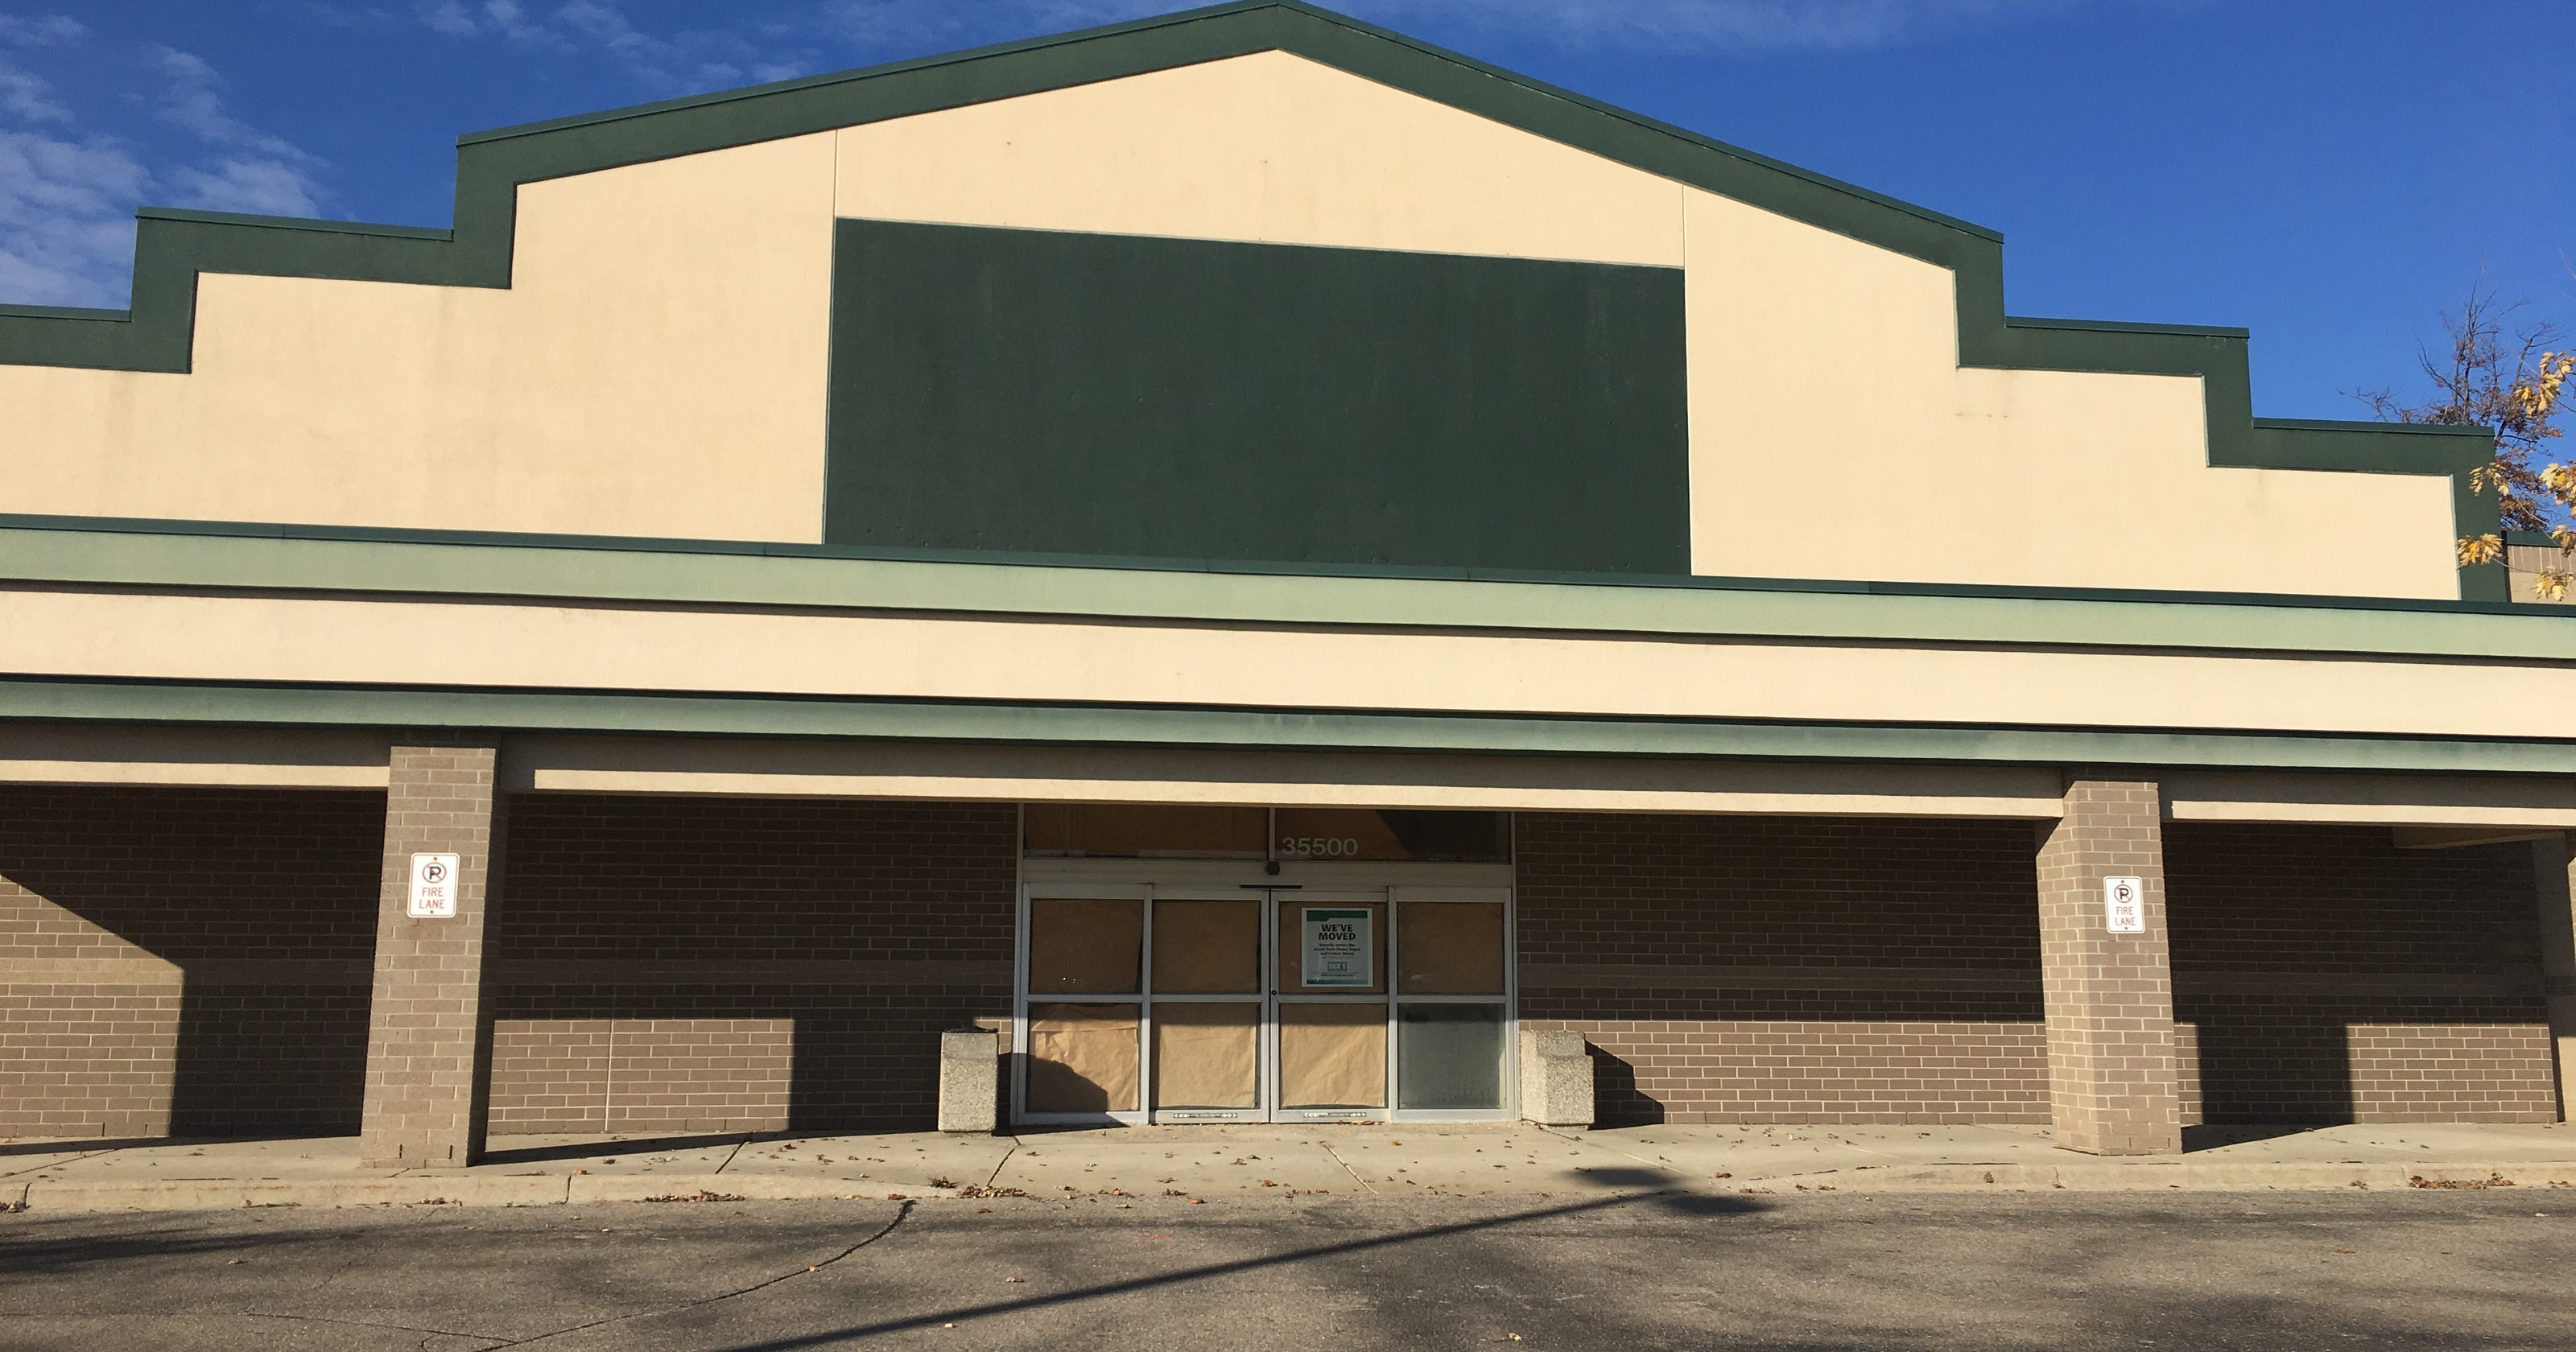 Empty Big Box Stores A Growing Problem Or Opportunity For Suburbs